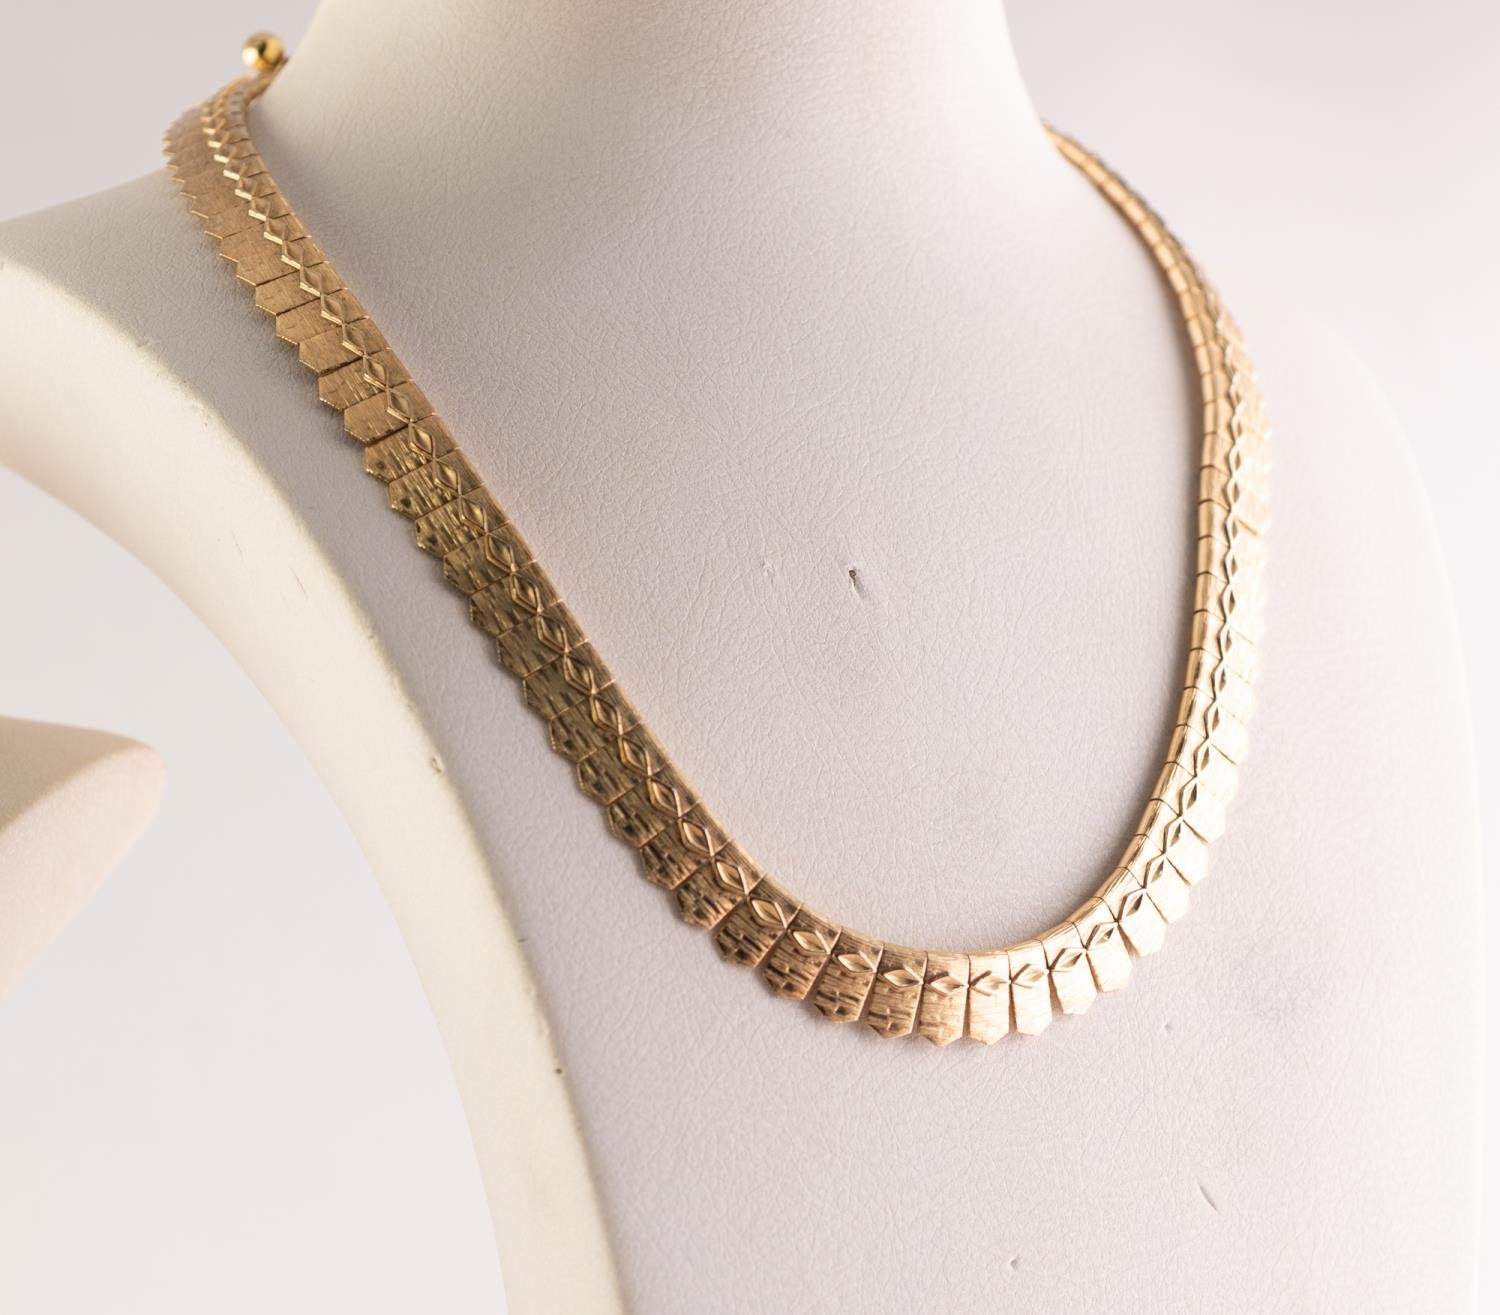 GOLD PLATED FRINGE PATTERN CHOKER NECKLACE; Trifari GOLD PLATED CHAIN NECKLACE with eleven spaced - Image 4 of 5